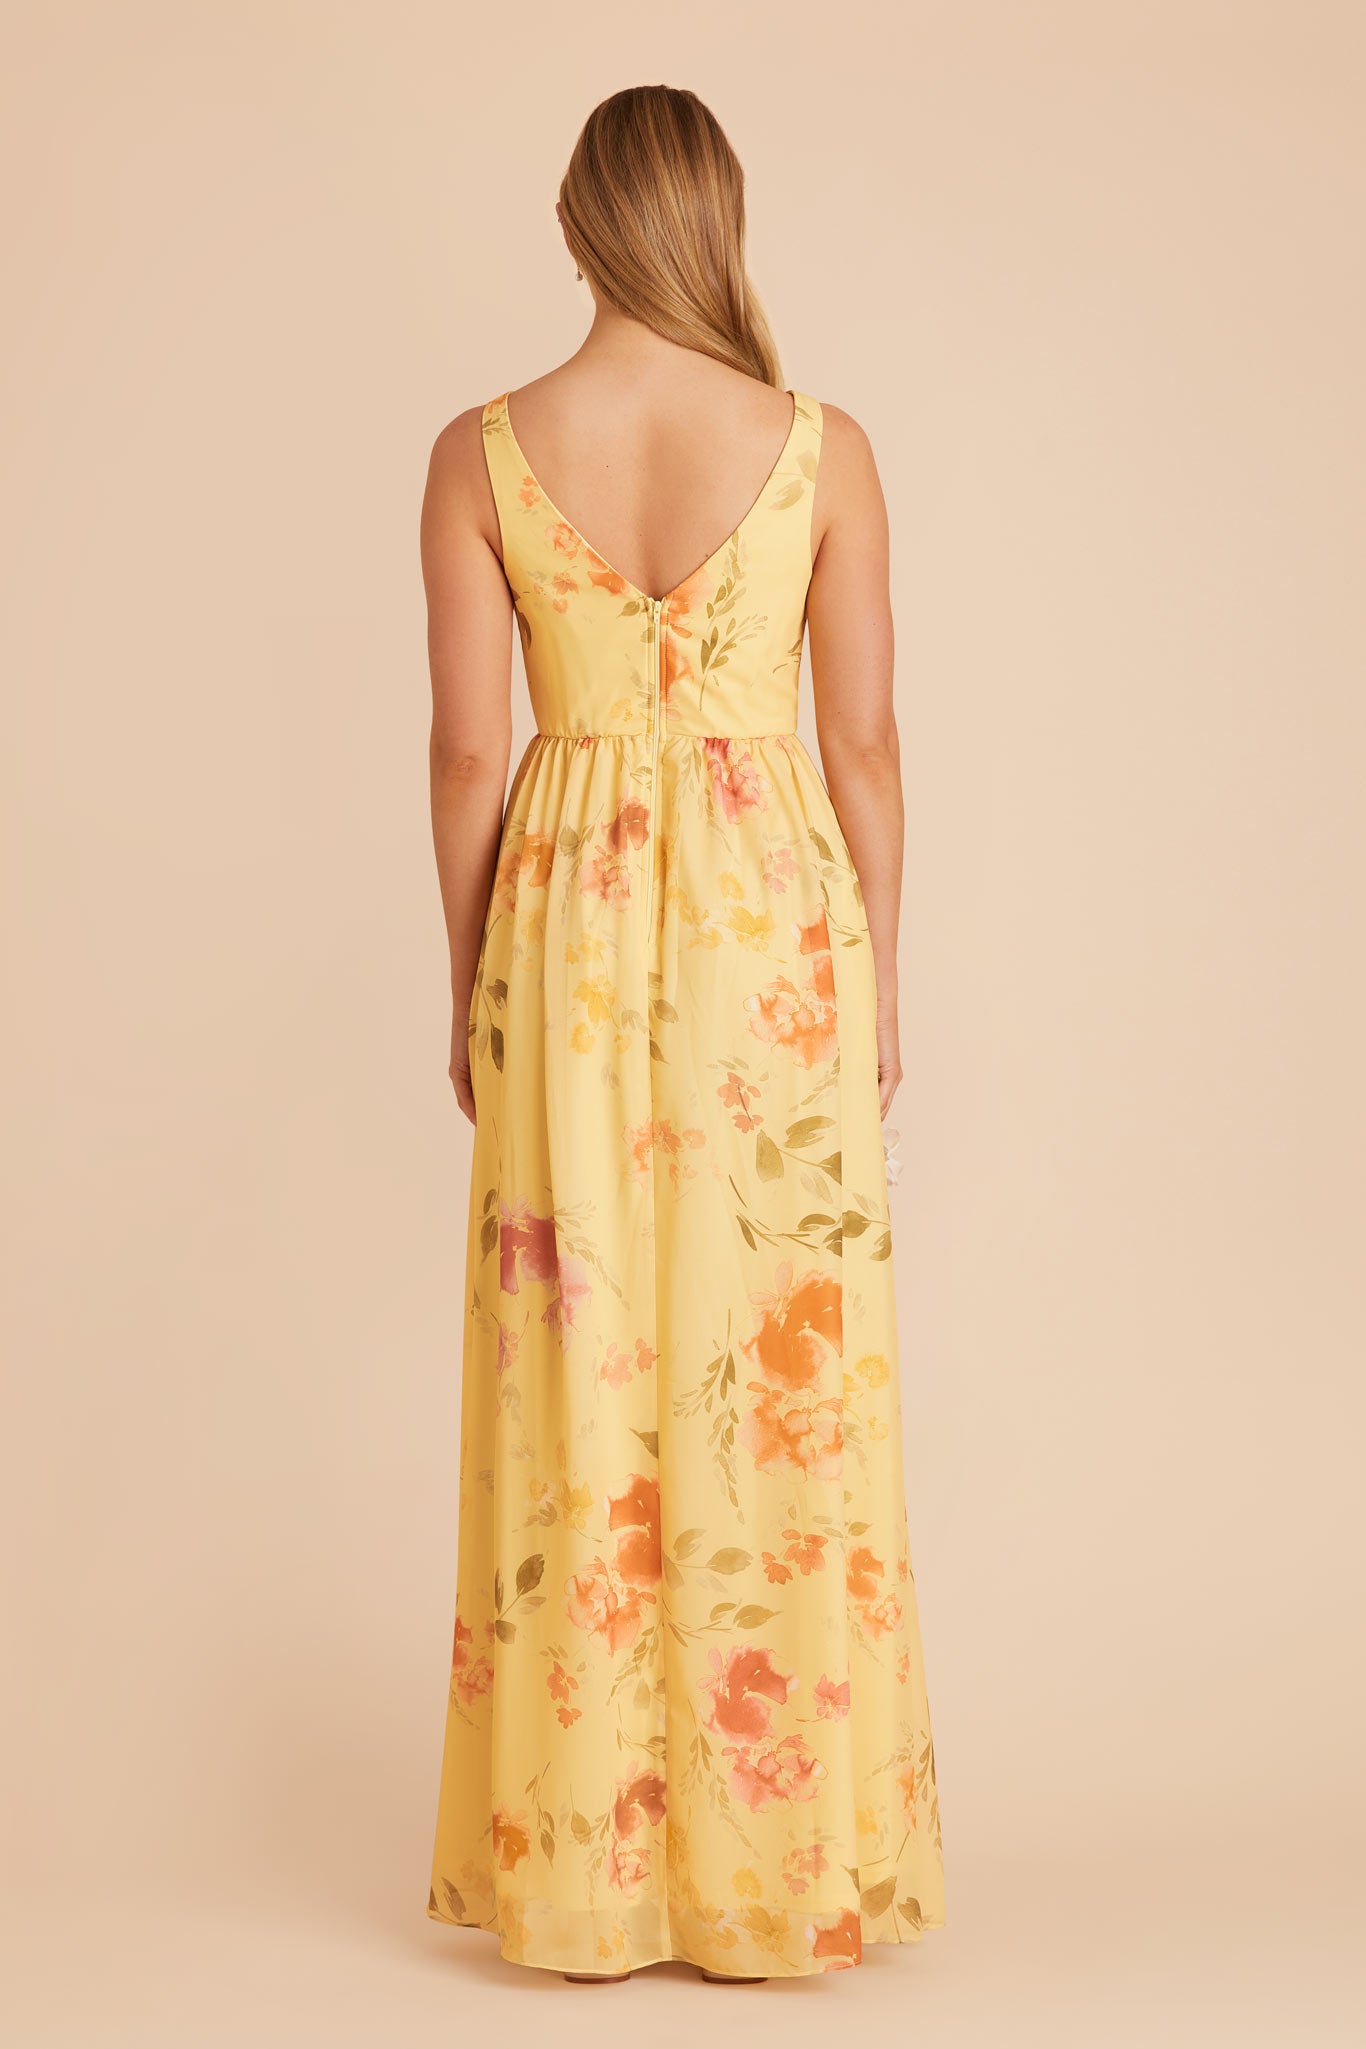 Pale Yellow Rococo Floral Laurie Empire Dress by Birdy Grey